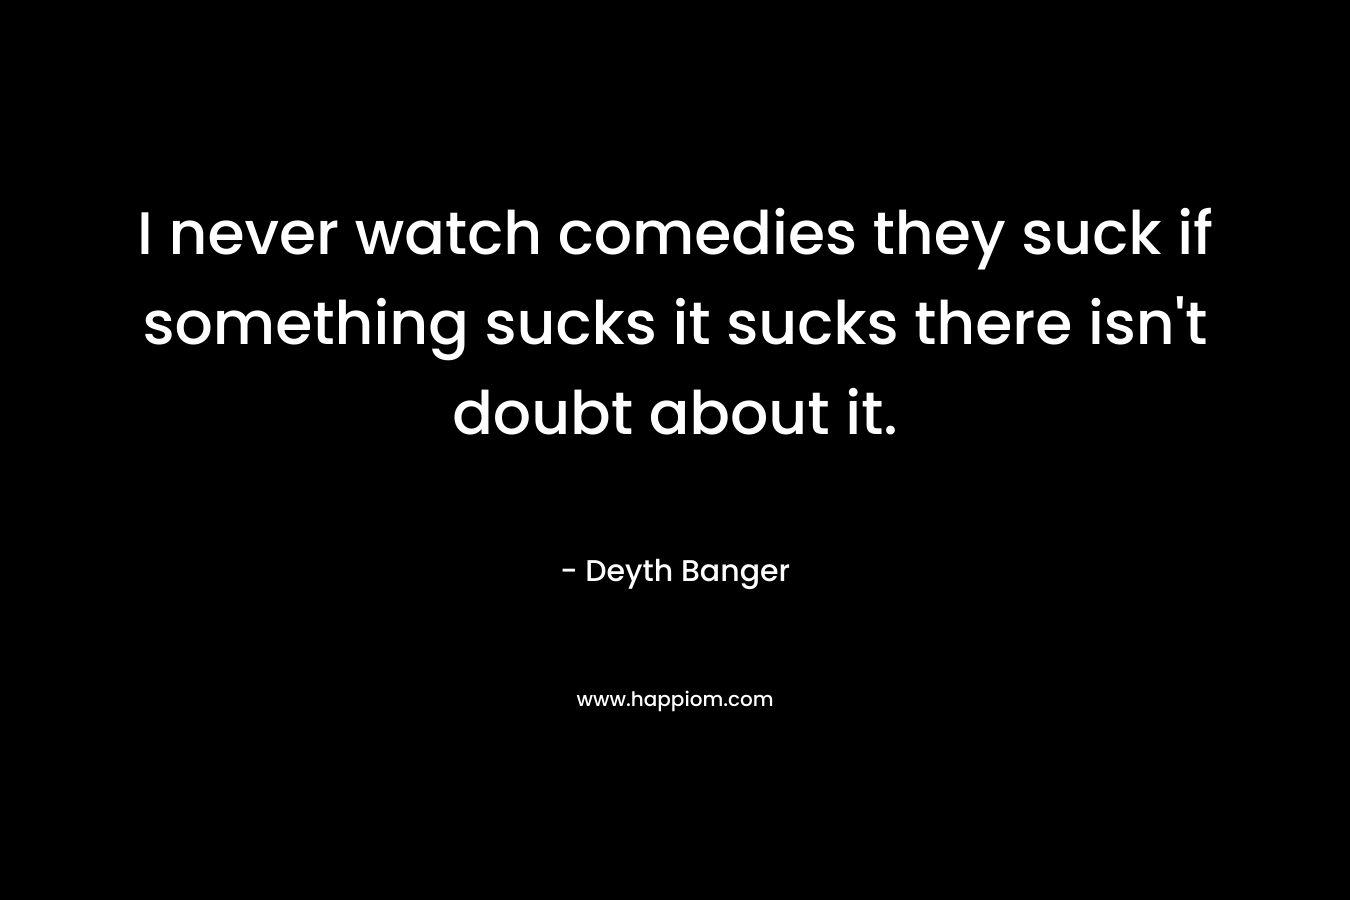 I never watch comedies they suck if something sucks it sucks there isn’t doubt about it. – Deyth Banger